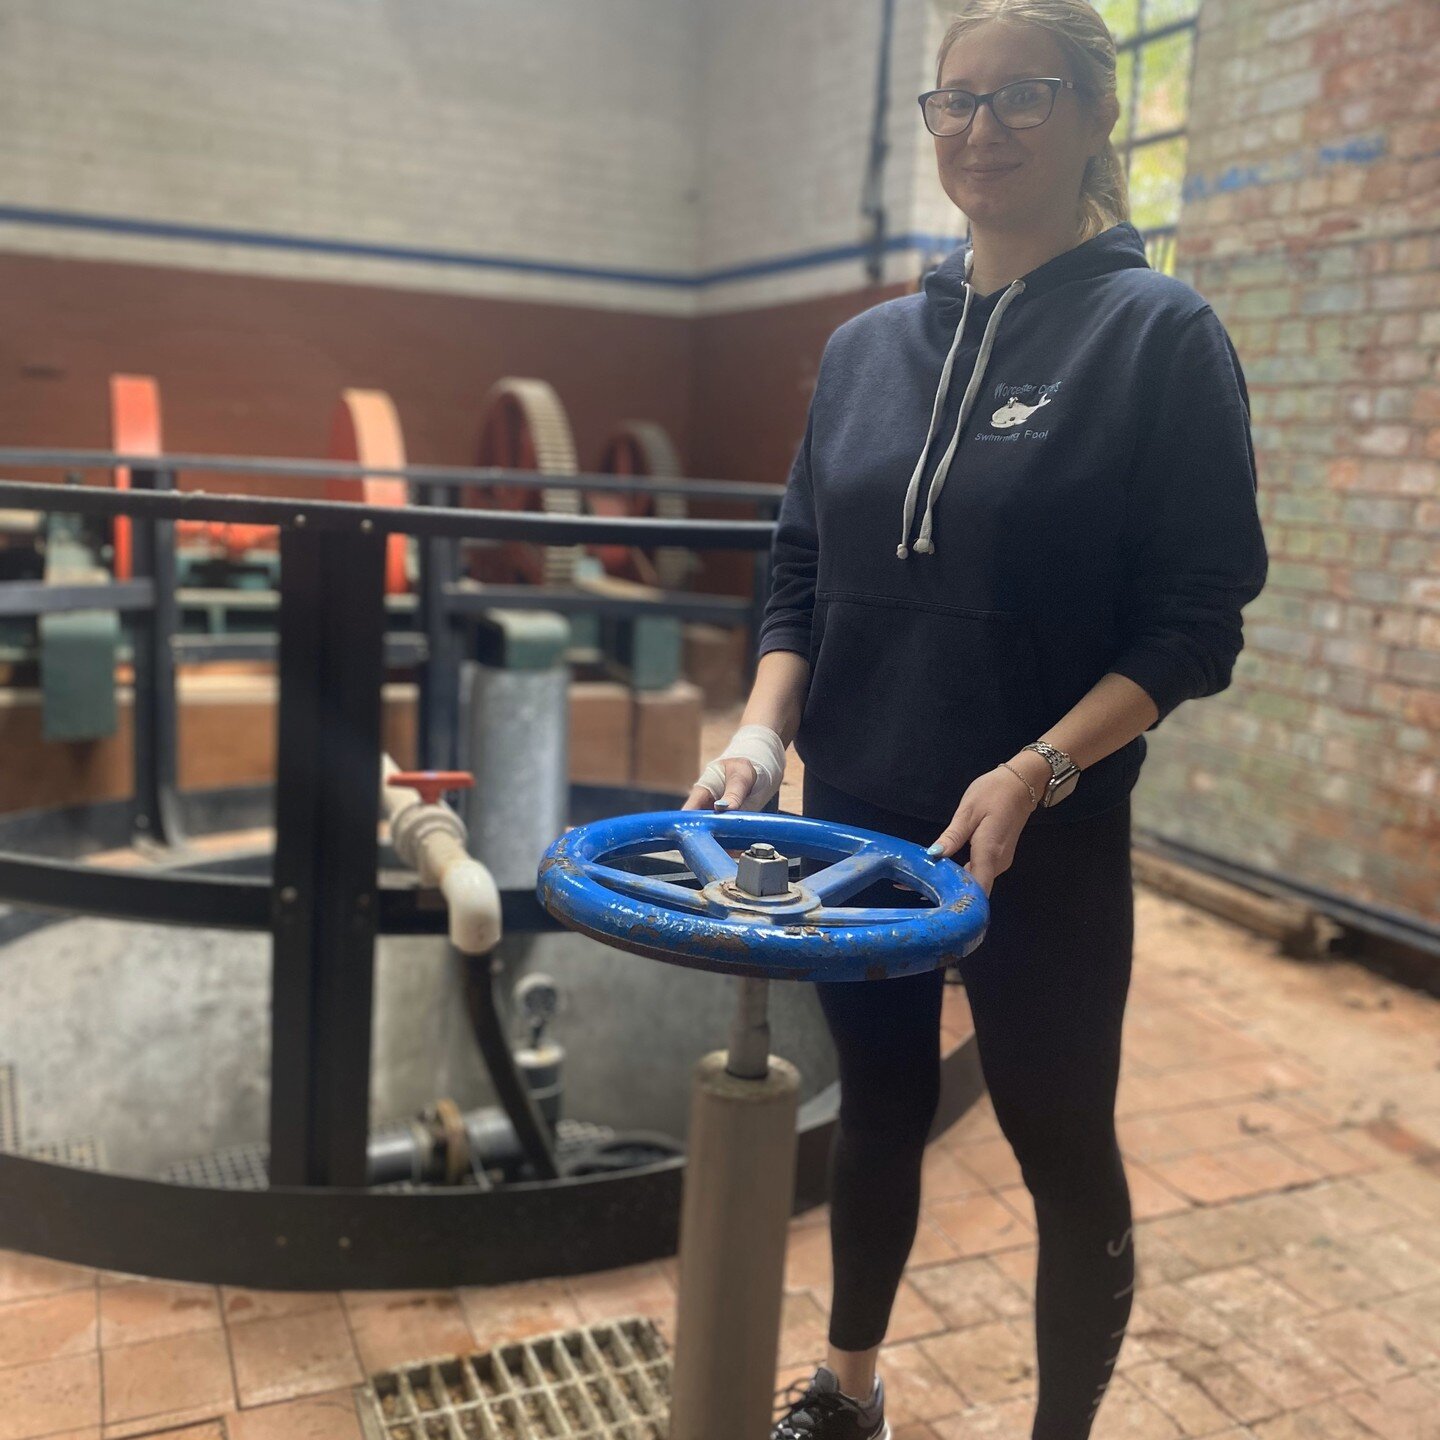 Our annual 'turning on the brine pump' photo 🙌 featuring our new Duty Managers at the Lido!

Tower Hill Brine Pump is the last working brine pump in Droitwich Spa, and supplies the Lido and Private Hospital with brine, using an electric submersible 